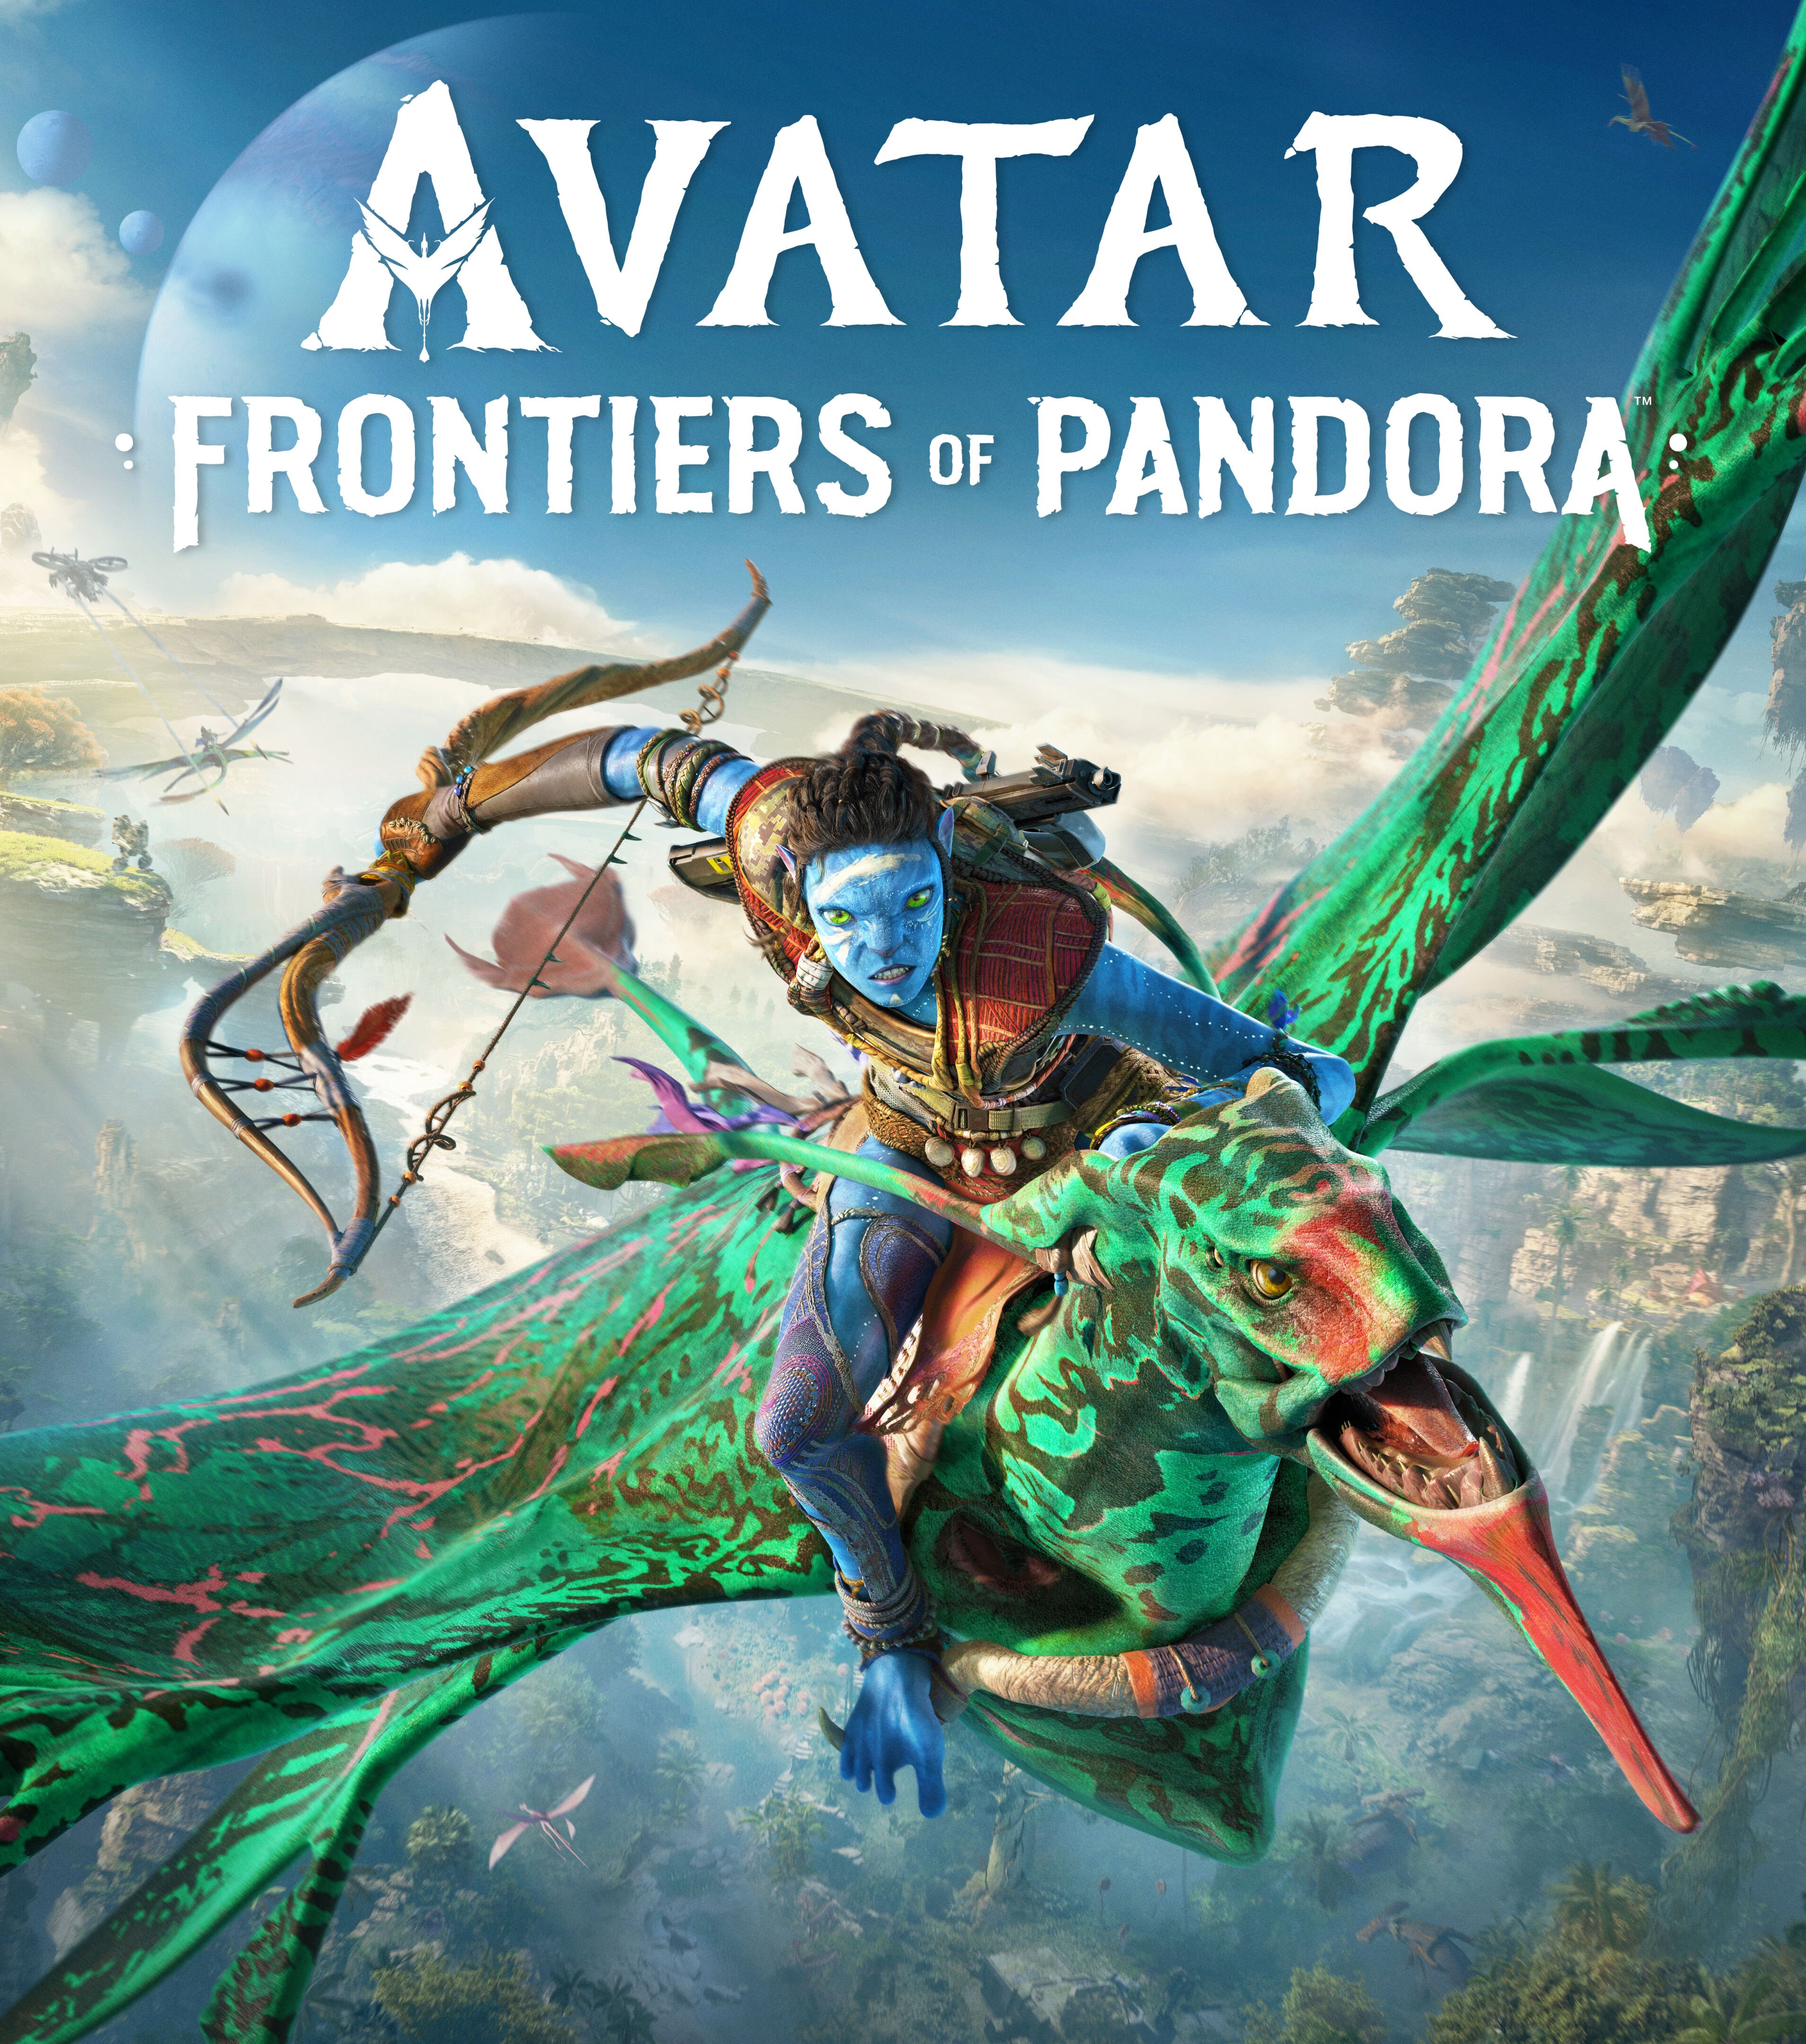 1080x1920 Resolution Avatar Gaming Frontiers of Pandora Iphone 7 6s 6  Plus and Pixel XL One Plus 3 3t 5 Wallpaper  Wallpapers Den